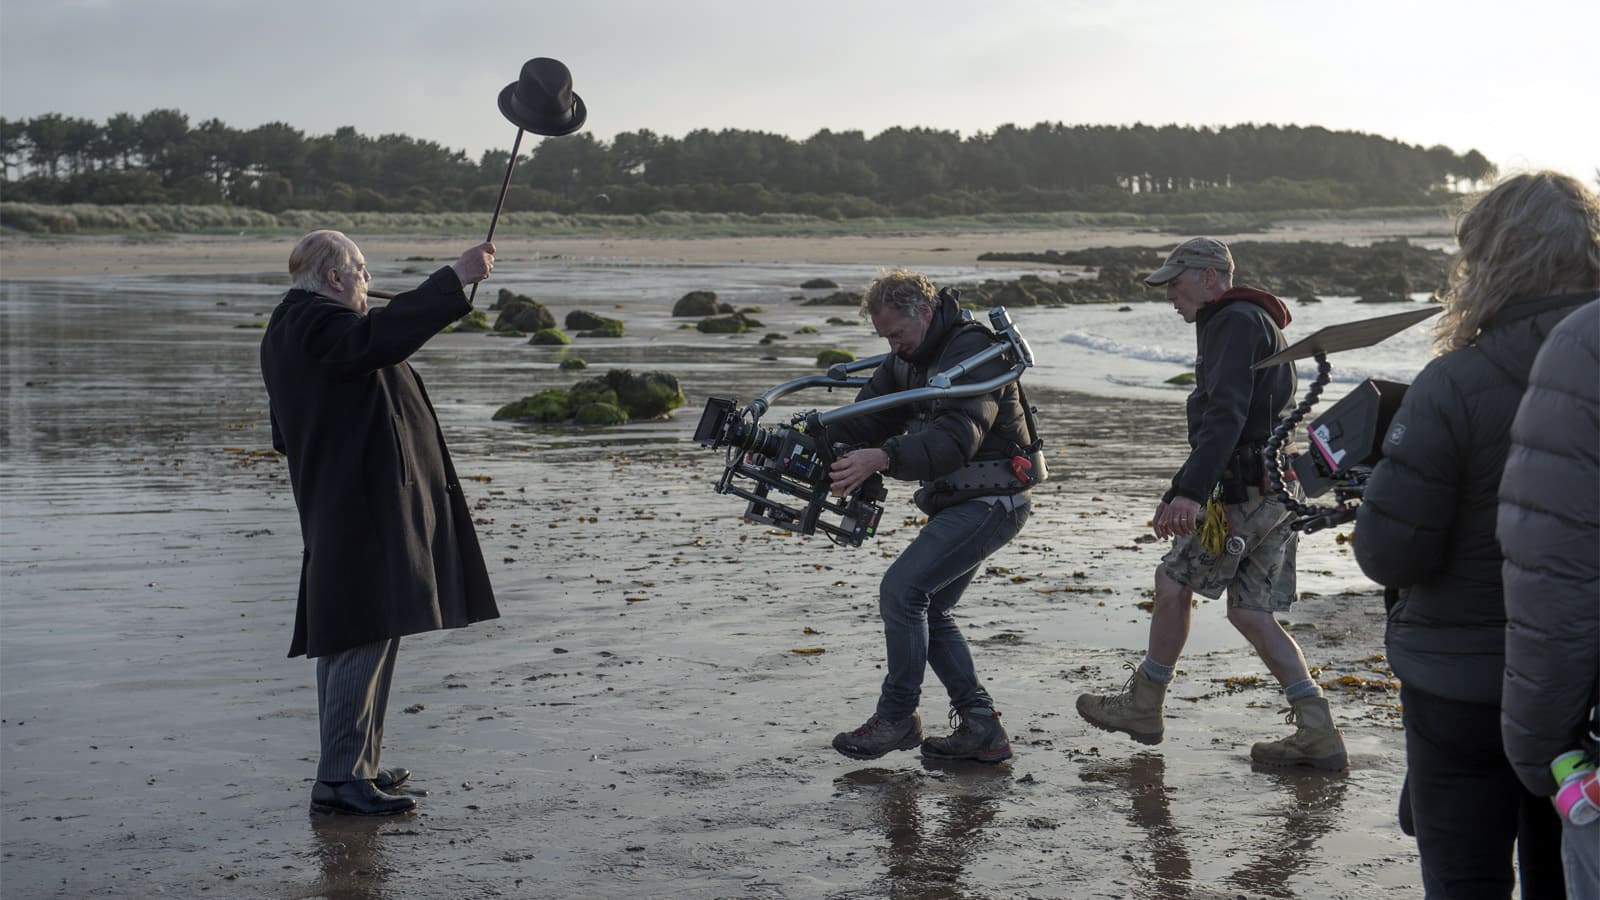 hurchill filming on the beach